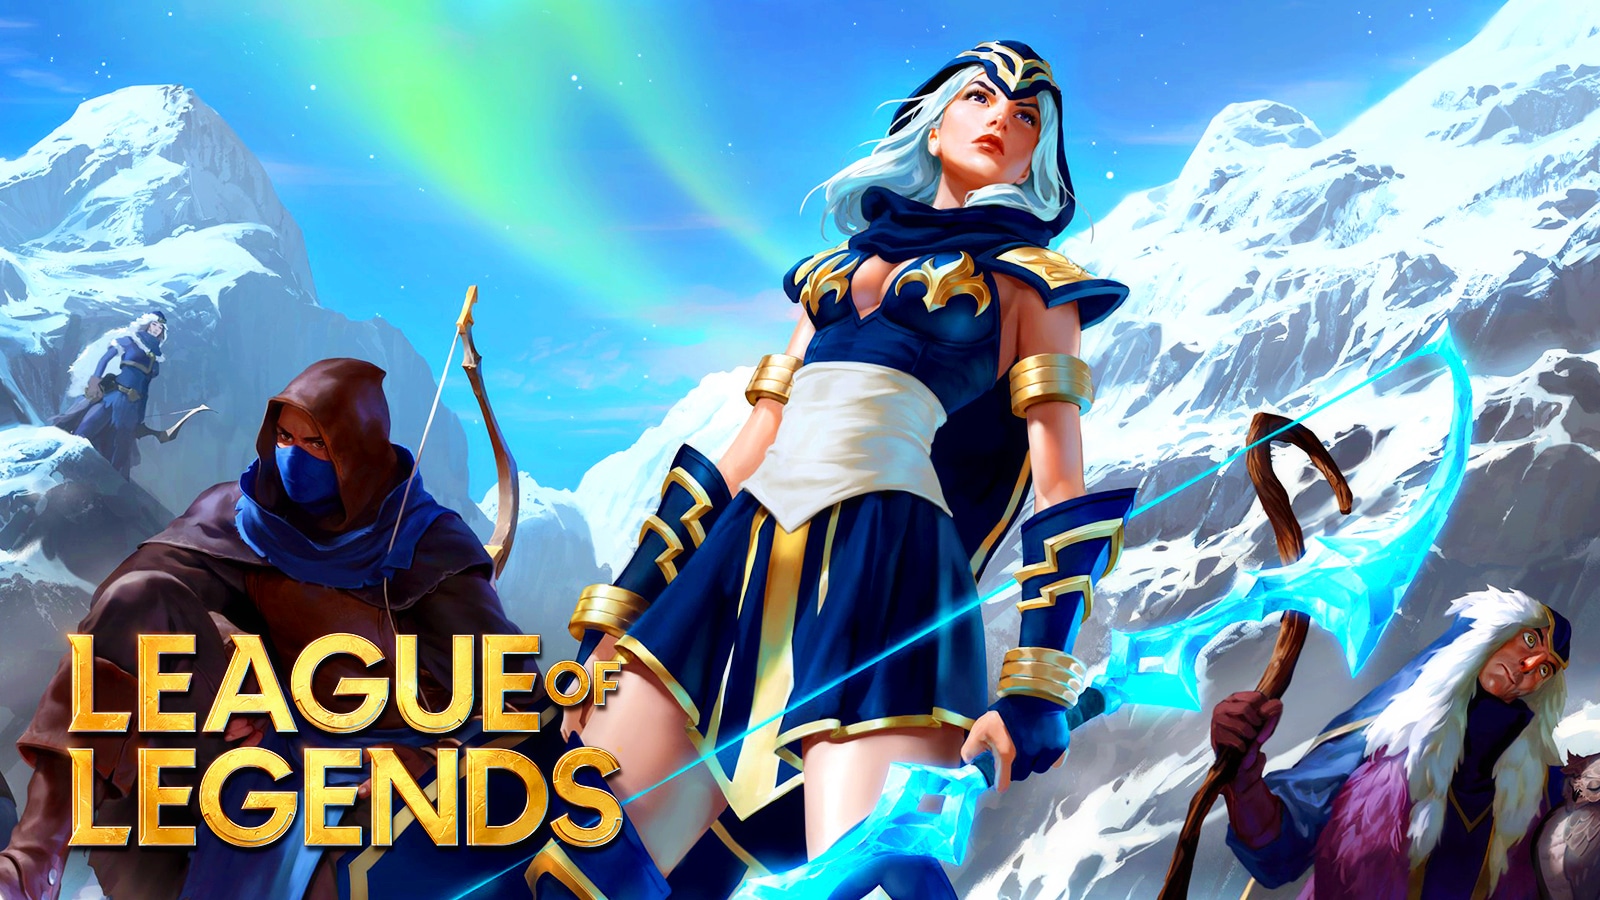 The League of Legends MMO